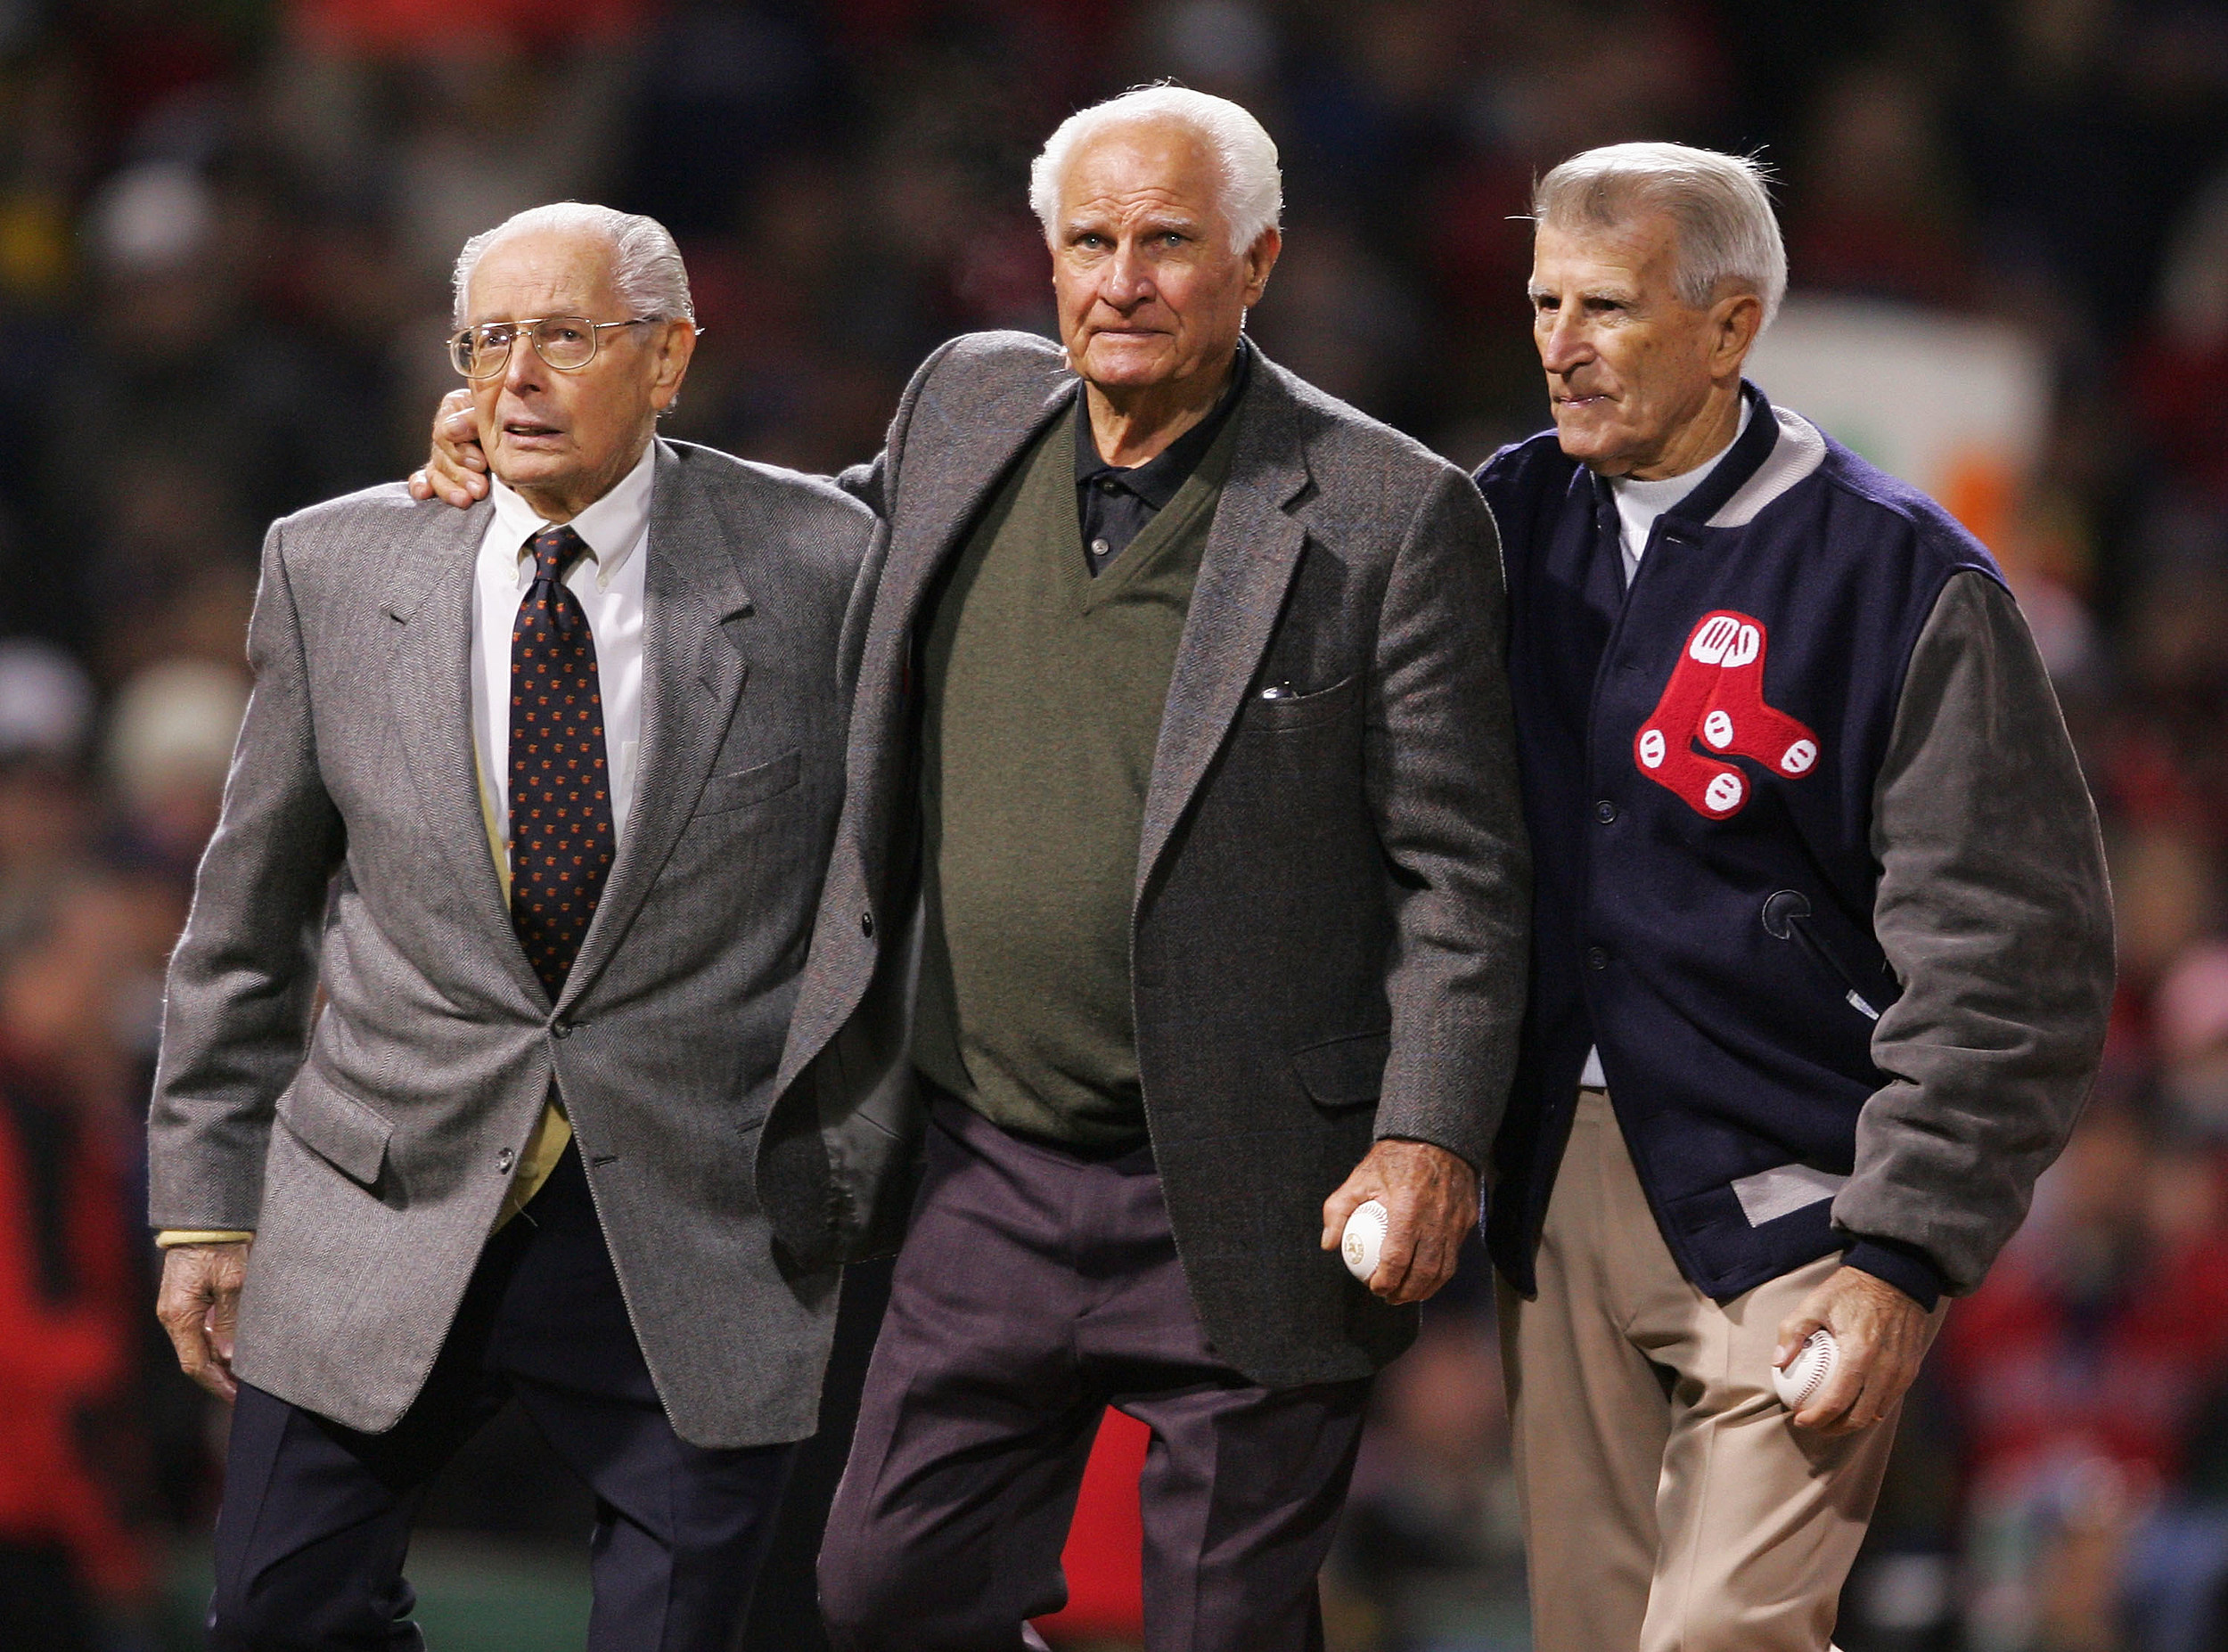 Bobby Doerr, Hall of Famer and Boston Red Sox Second Baseman, Dies at 99